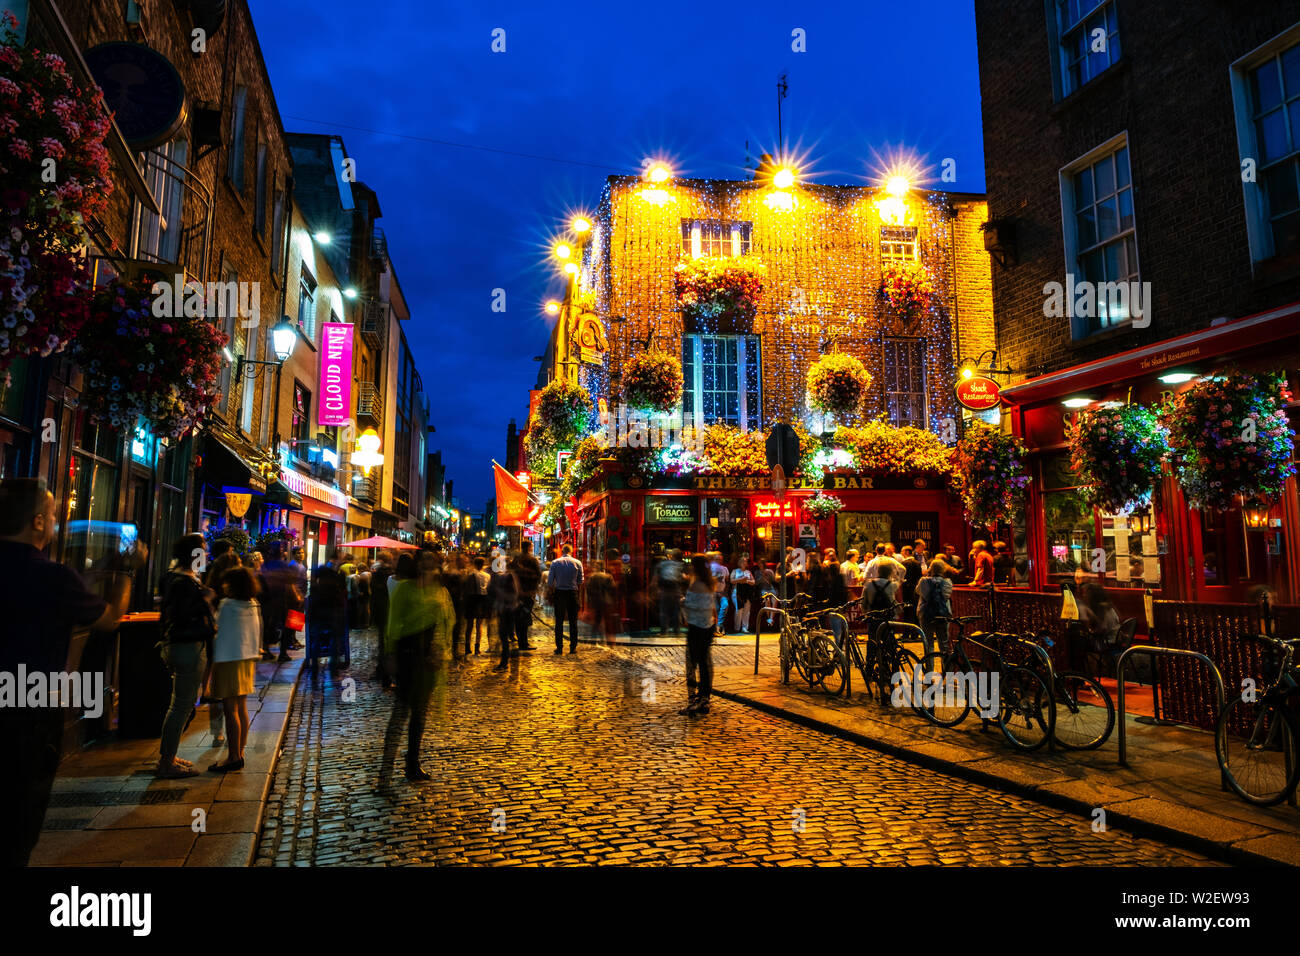 DUBLIN, IRELAND - JULY 19, 2017: Nightlife at popular historical part of the city - Temple Bar quarter in Dublin, Ireland. The area is the location of Stock Photo